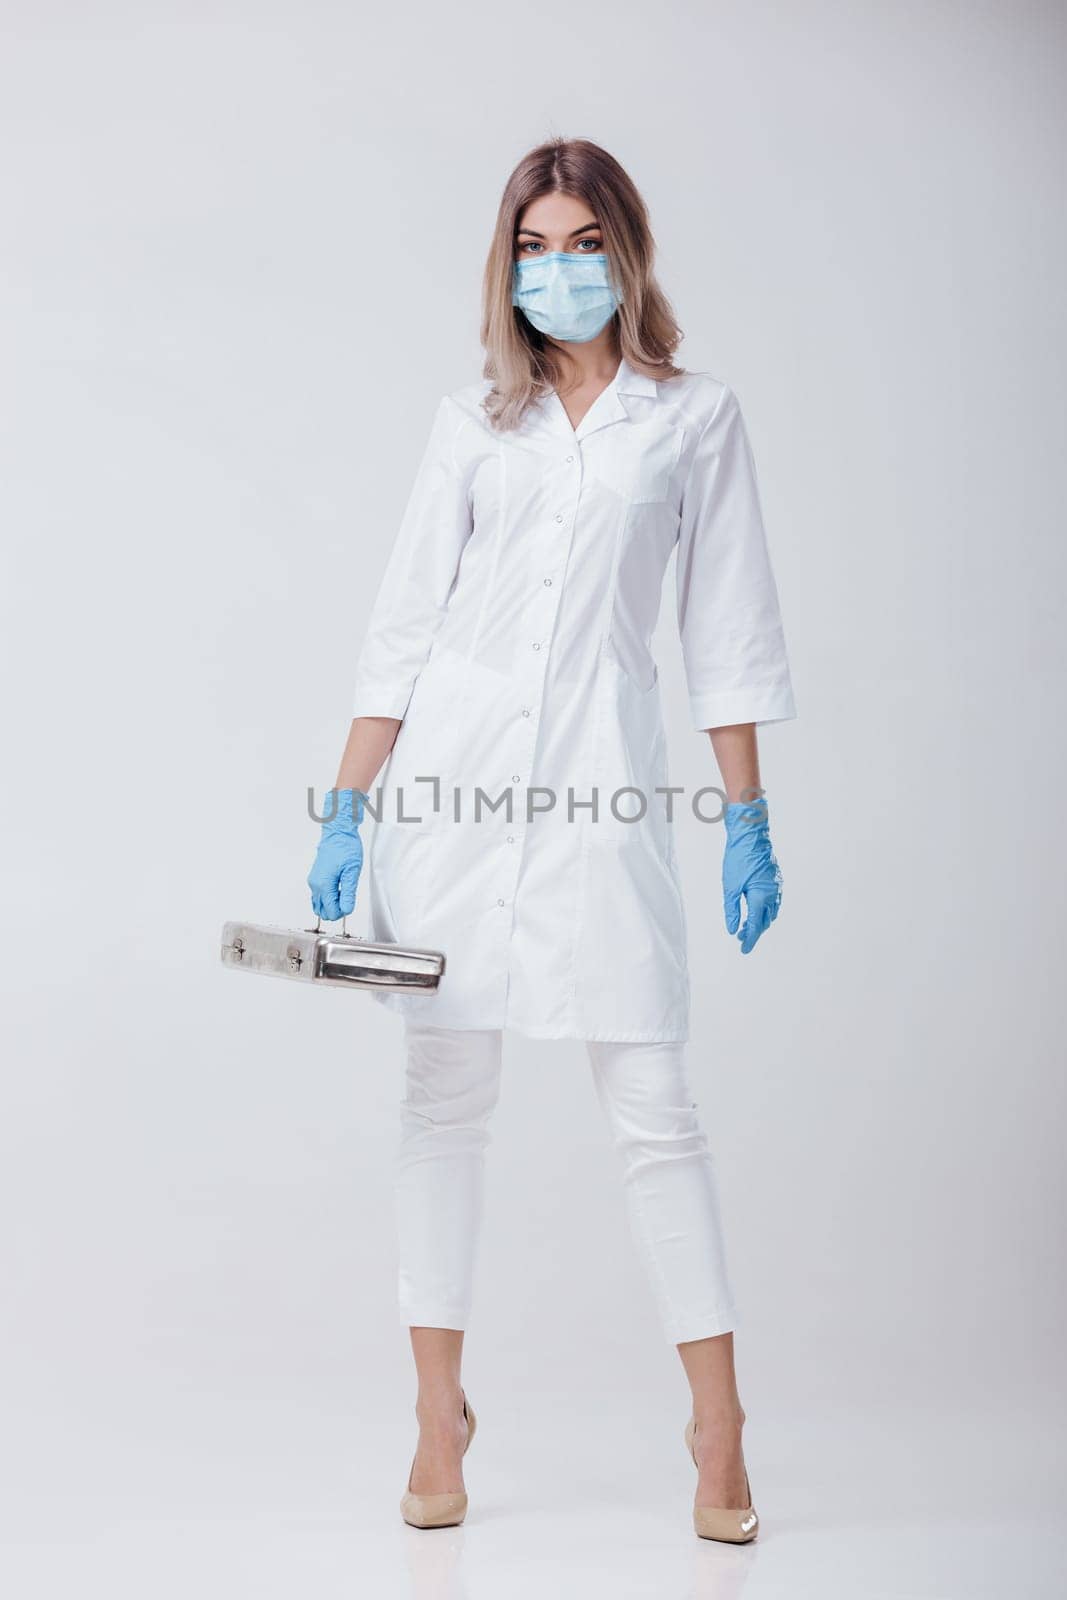 woman doctor with face mask and medical gloves holds a metal bag with medical instruments